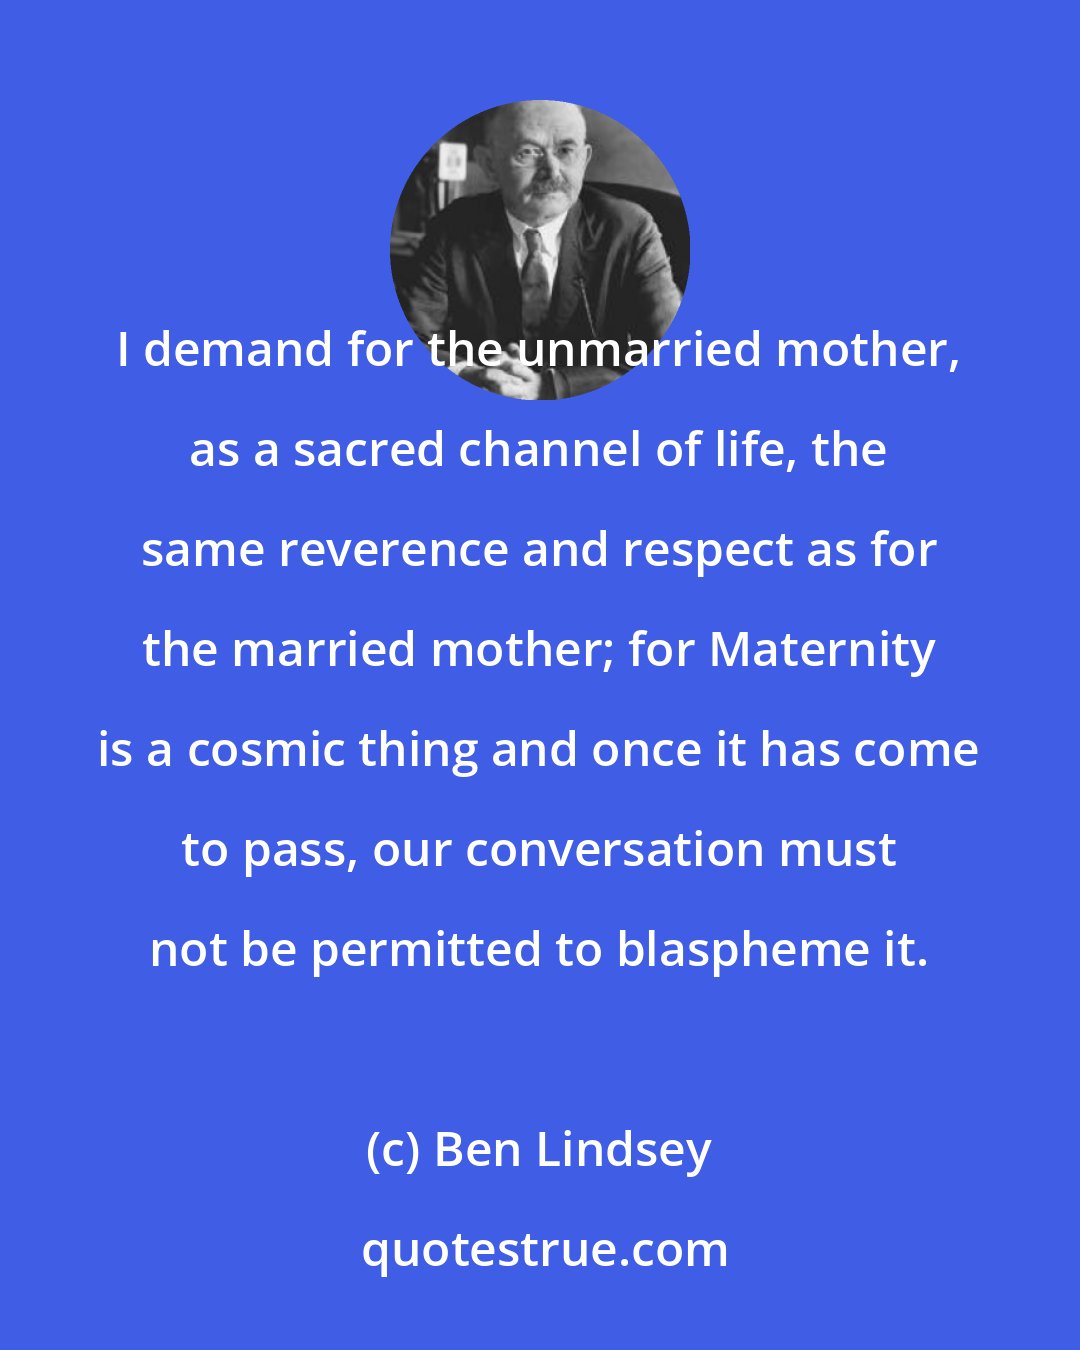 Ben Lindsey: I demand for the unmarried mother, as a sacred channel of life, the same reverence and respect as for the married mother; for Maternity is a cosmic thing and once it has come to pass, our conversation must not be permitted to blaspheme it.